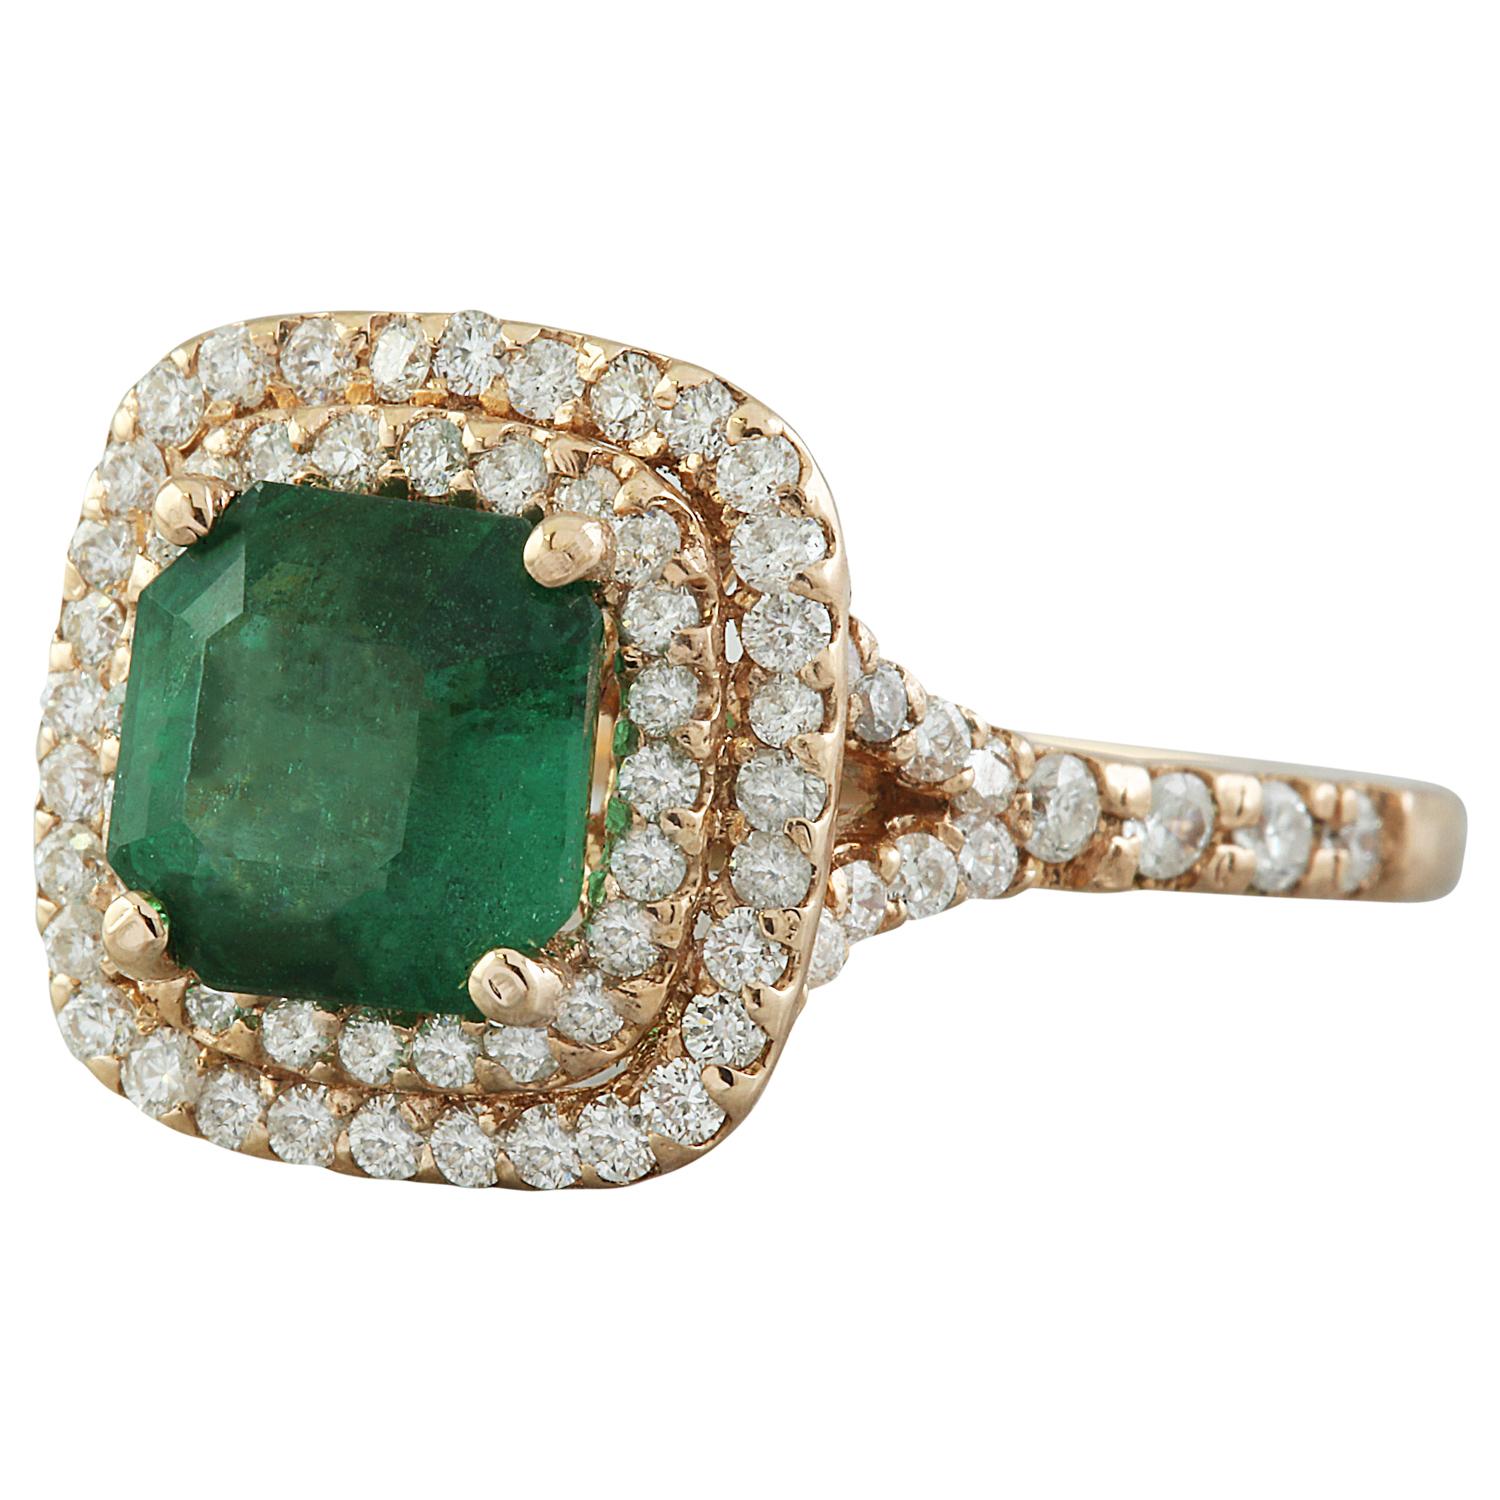 2.25 Carat Natural Emerald 14 Karat Solid Rose Gold Diamond Ring
Stamped: 14K
Total Ring Weight: 3.4 Grams 
Emerald Weight 1.45 Carat (7.00x7.00 Millimeters)
Diamond Weight: 0.80 carat (F-G Color, VS2-SI1 Clarity )
Face Measures: 12.15x11.95 